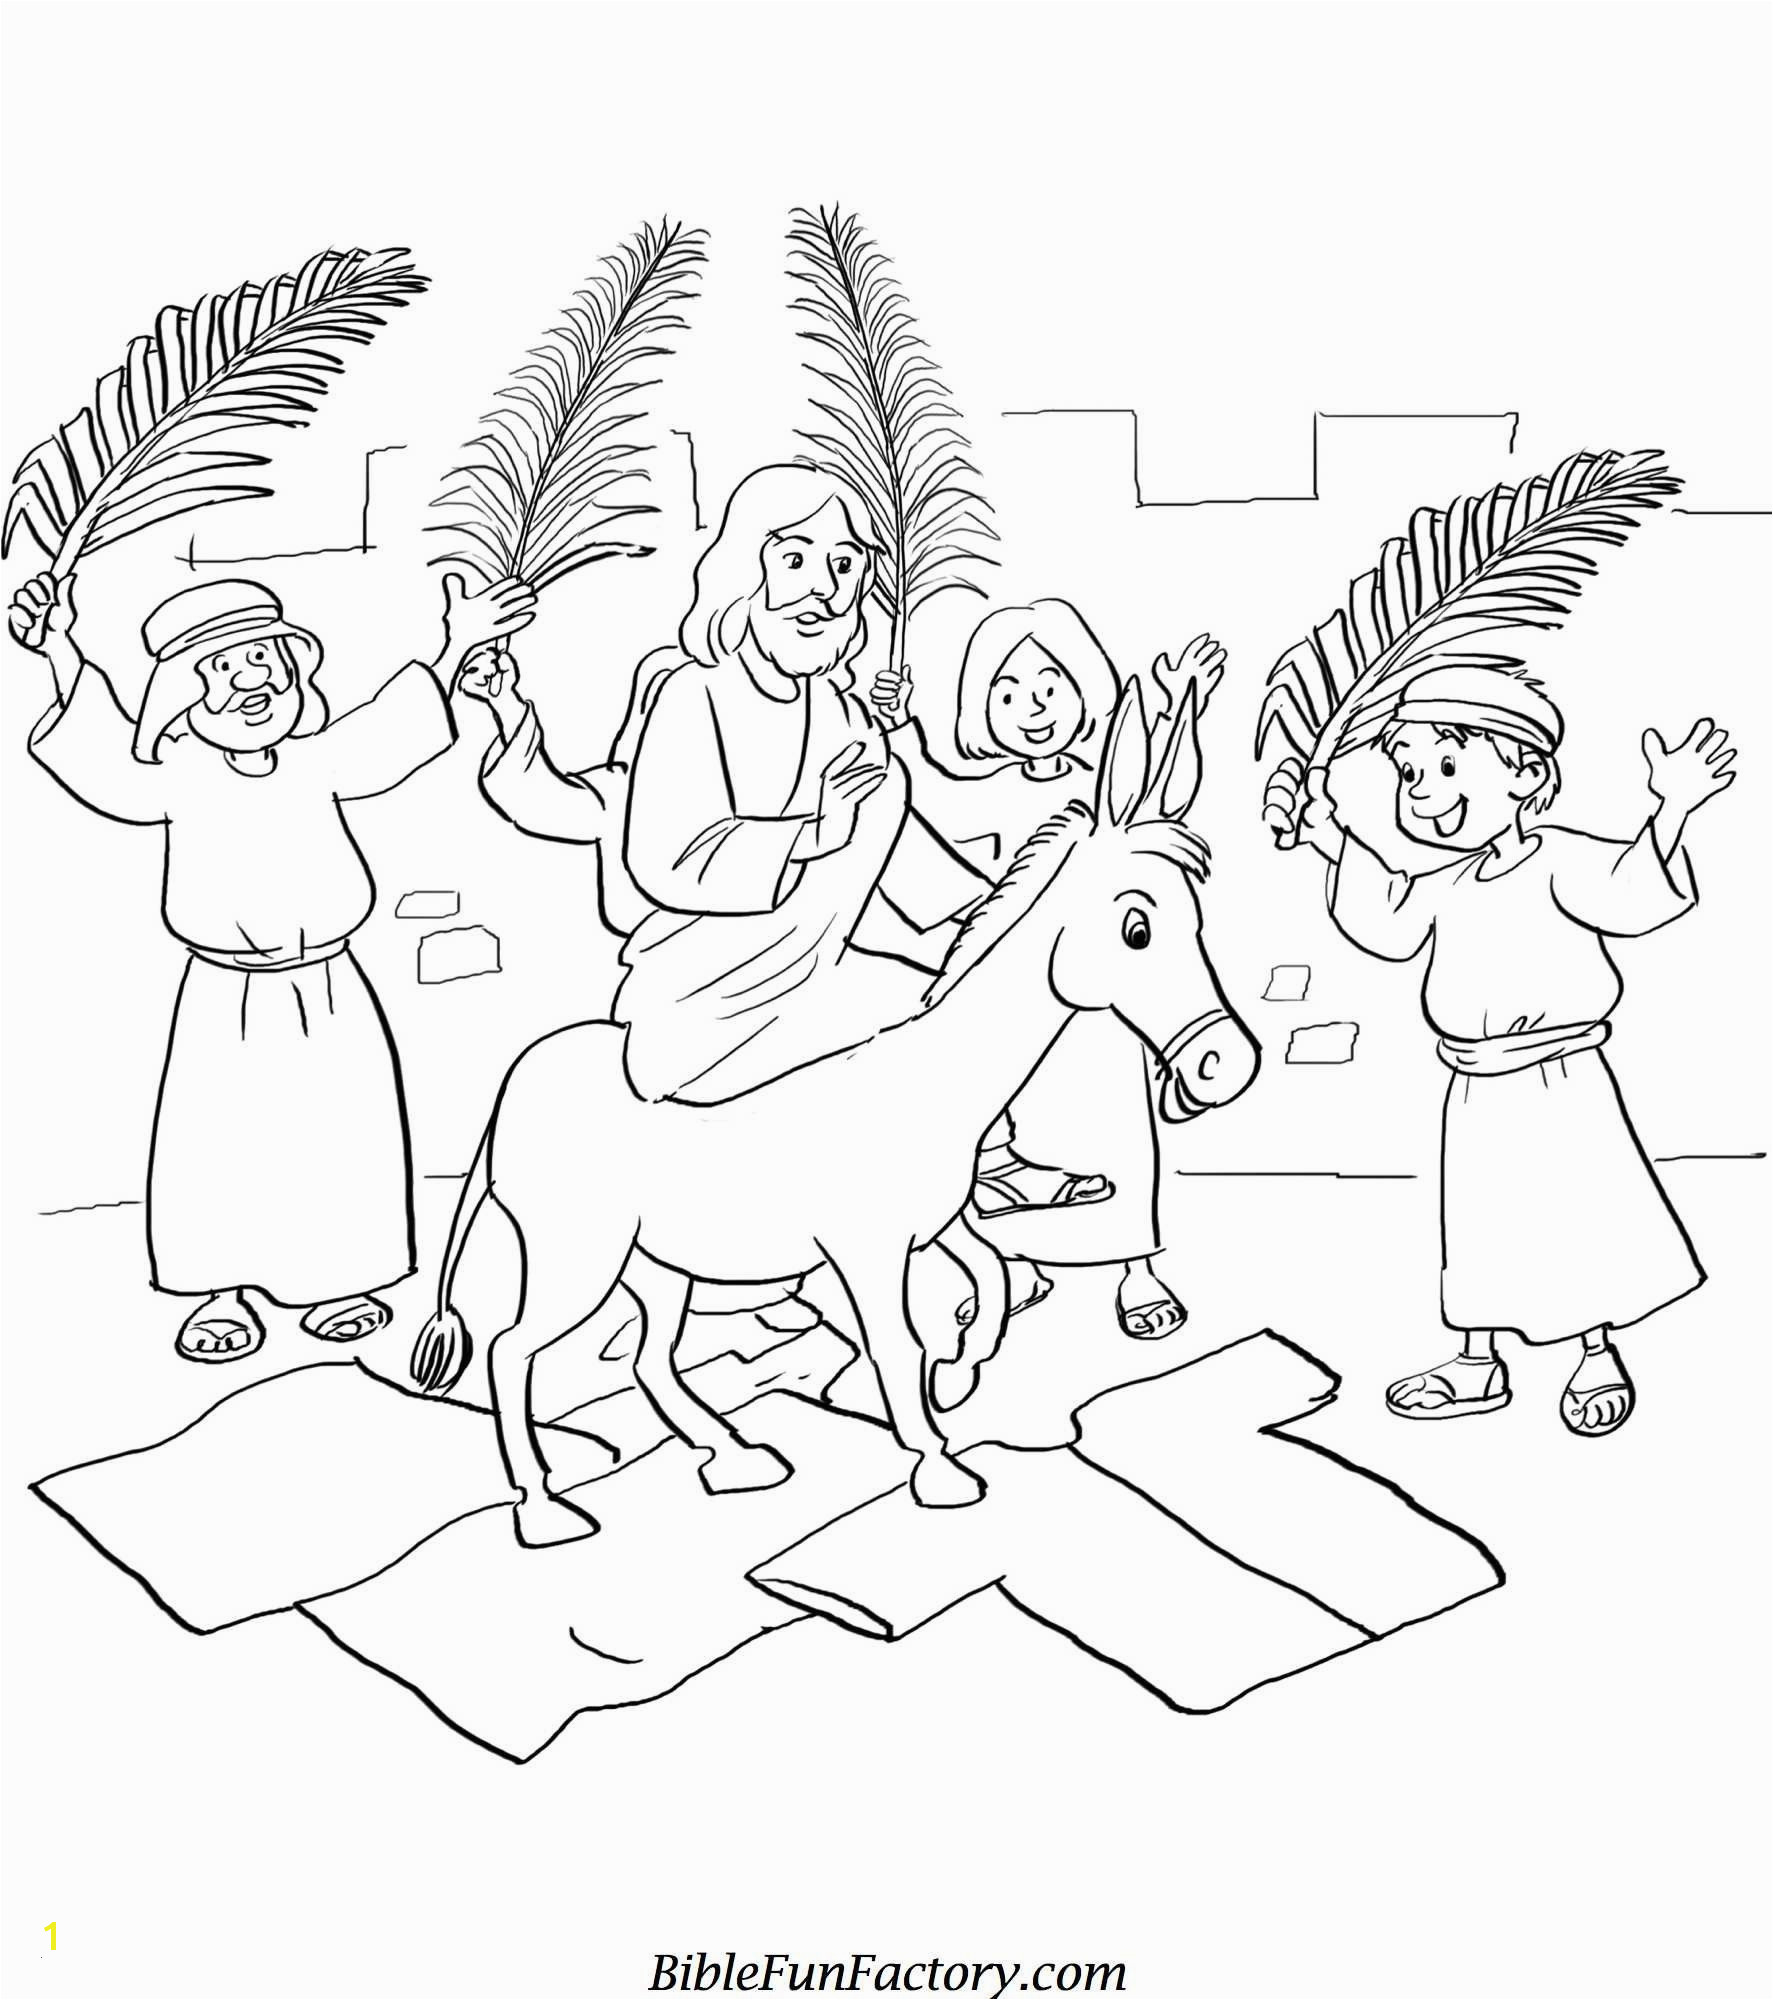 Jesus ascension Coloring Page Free Coloring Pages Jesus ascension Coloring Pages Coloring Pages